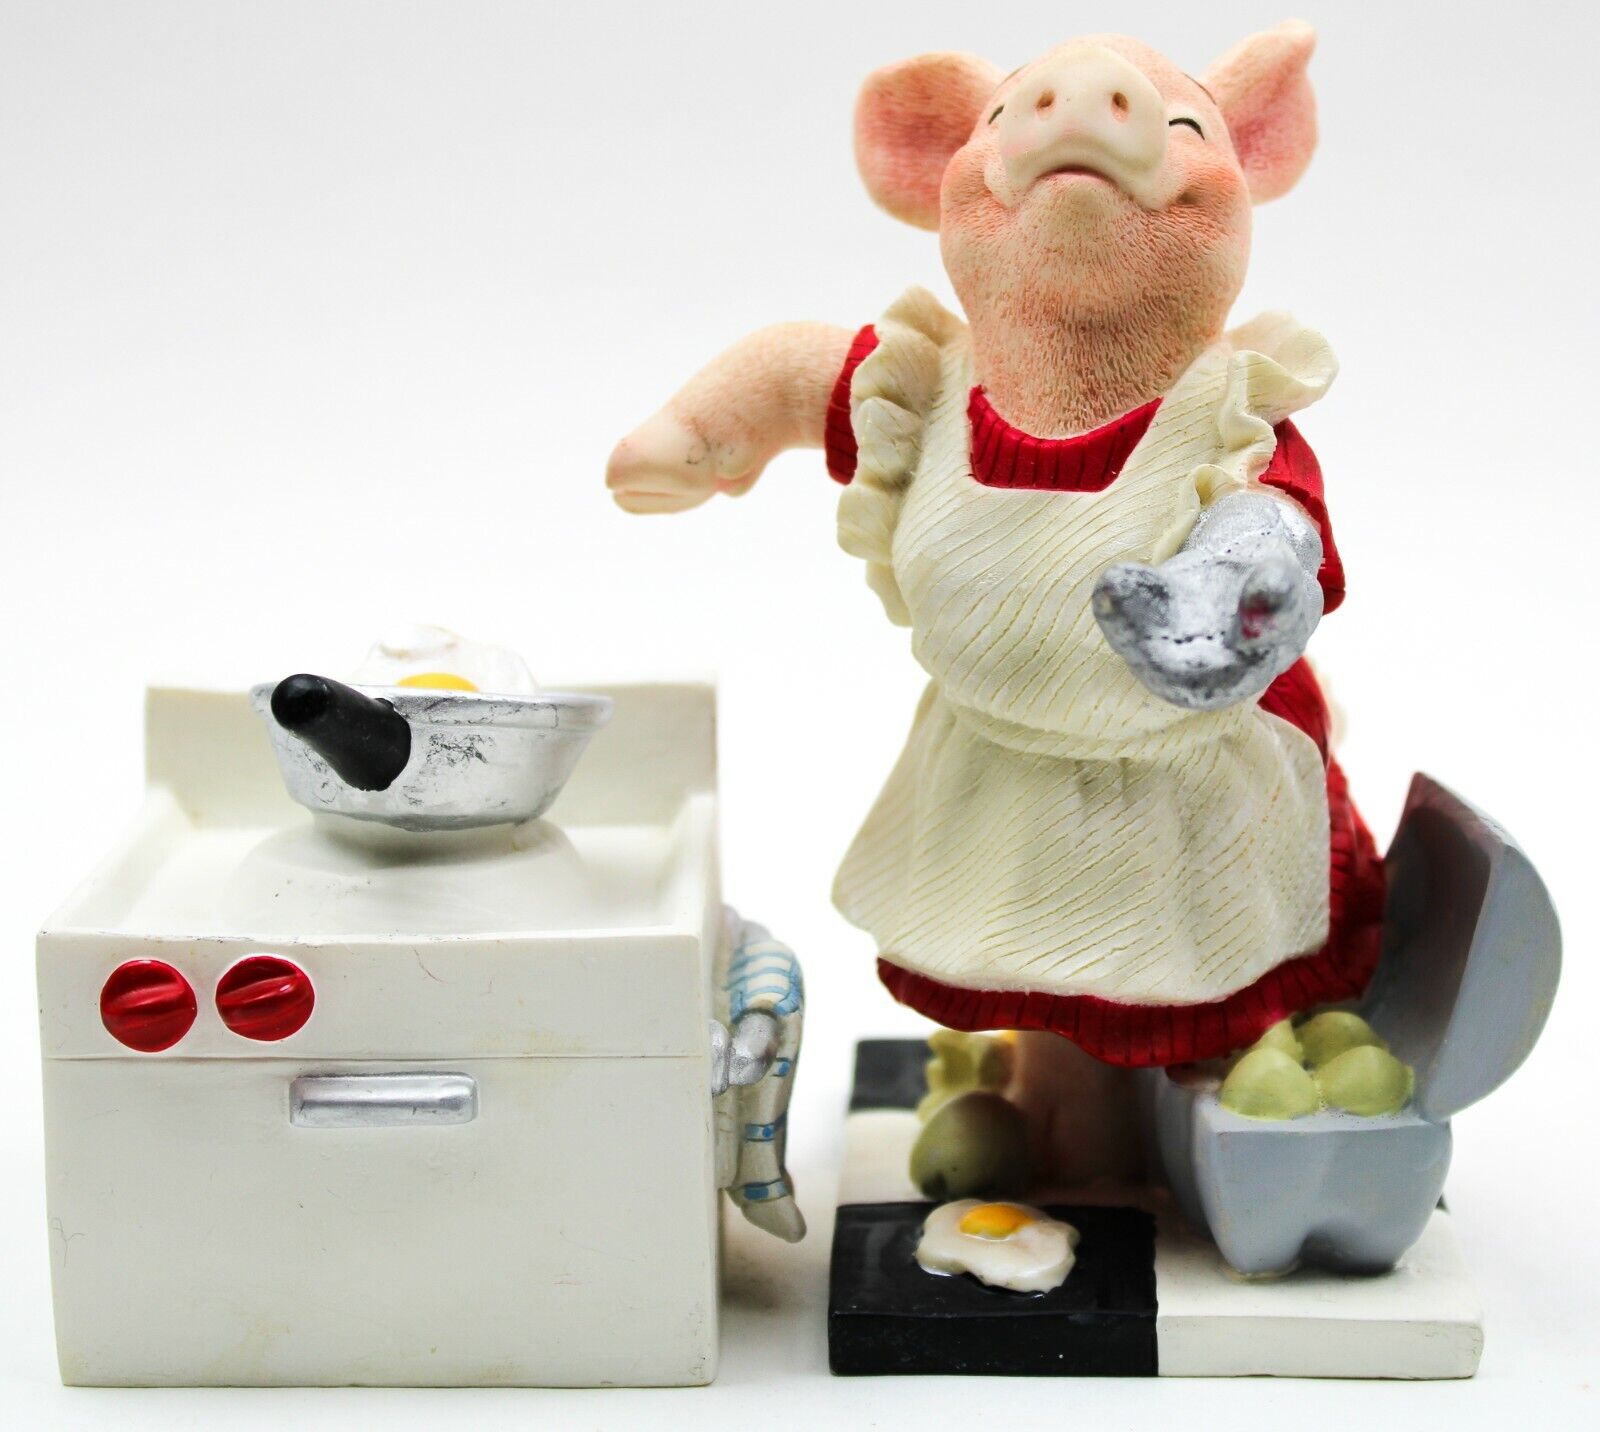 Pig Cooking Eggs Over Stove Figurine (2 PCS) 5\